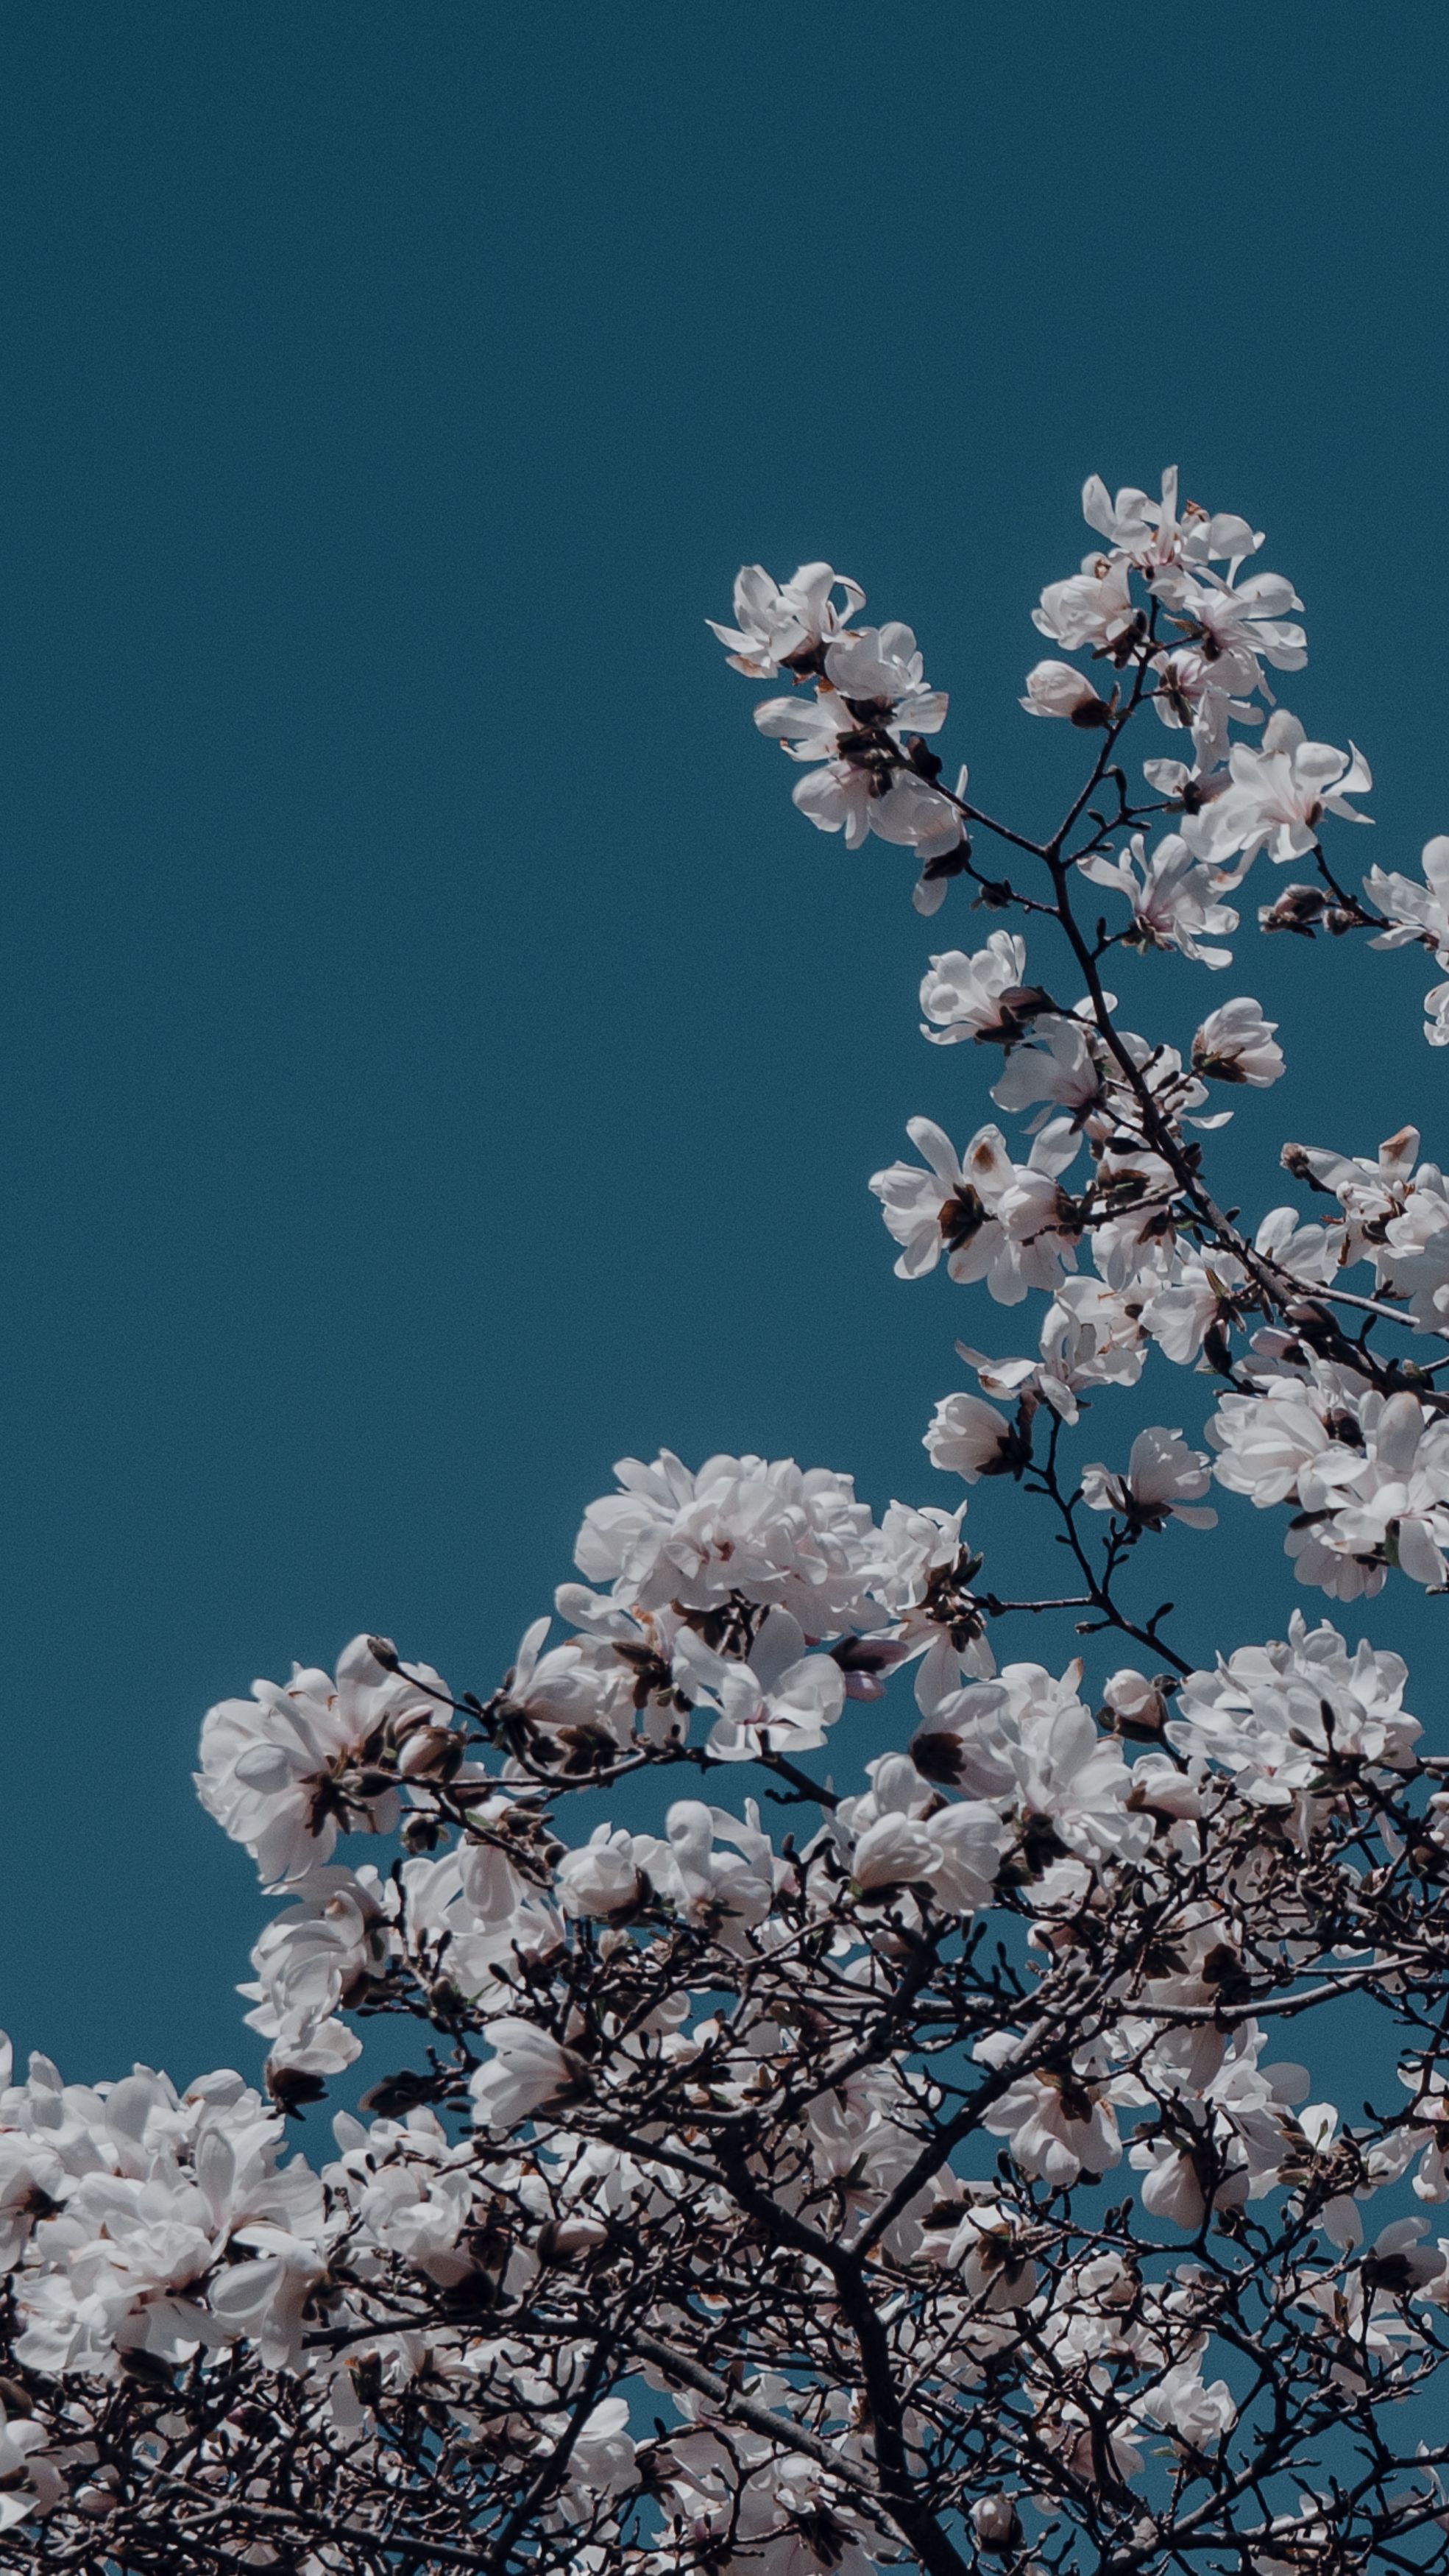 A tree with white flowers in the foreground - Navy blue, flower, dark blue, vintage, cherry blossom, retro, blue, phone, plants, HD